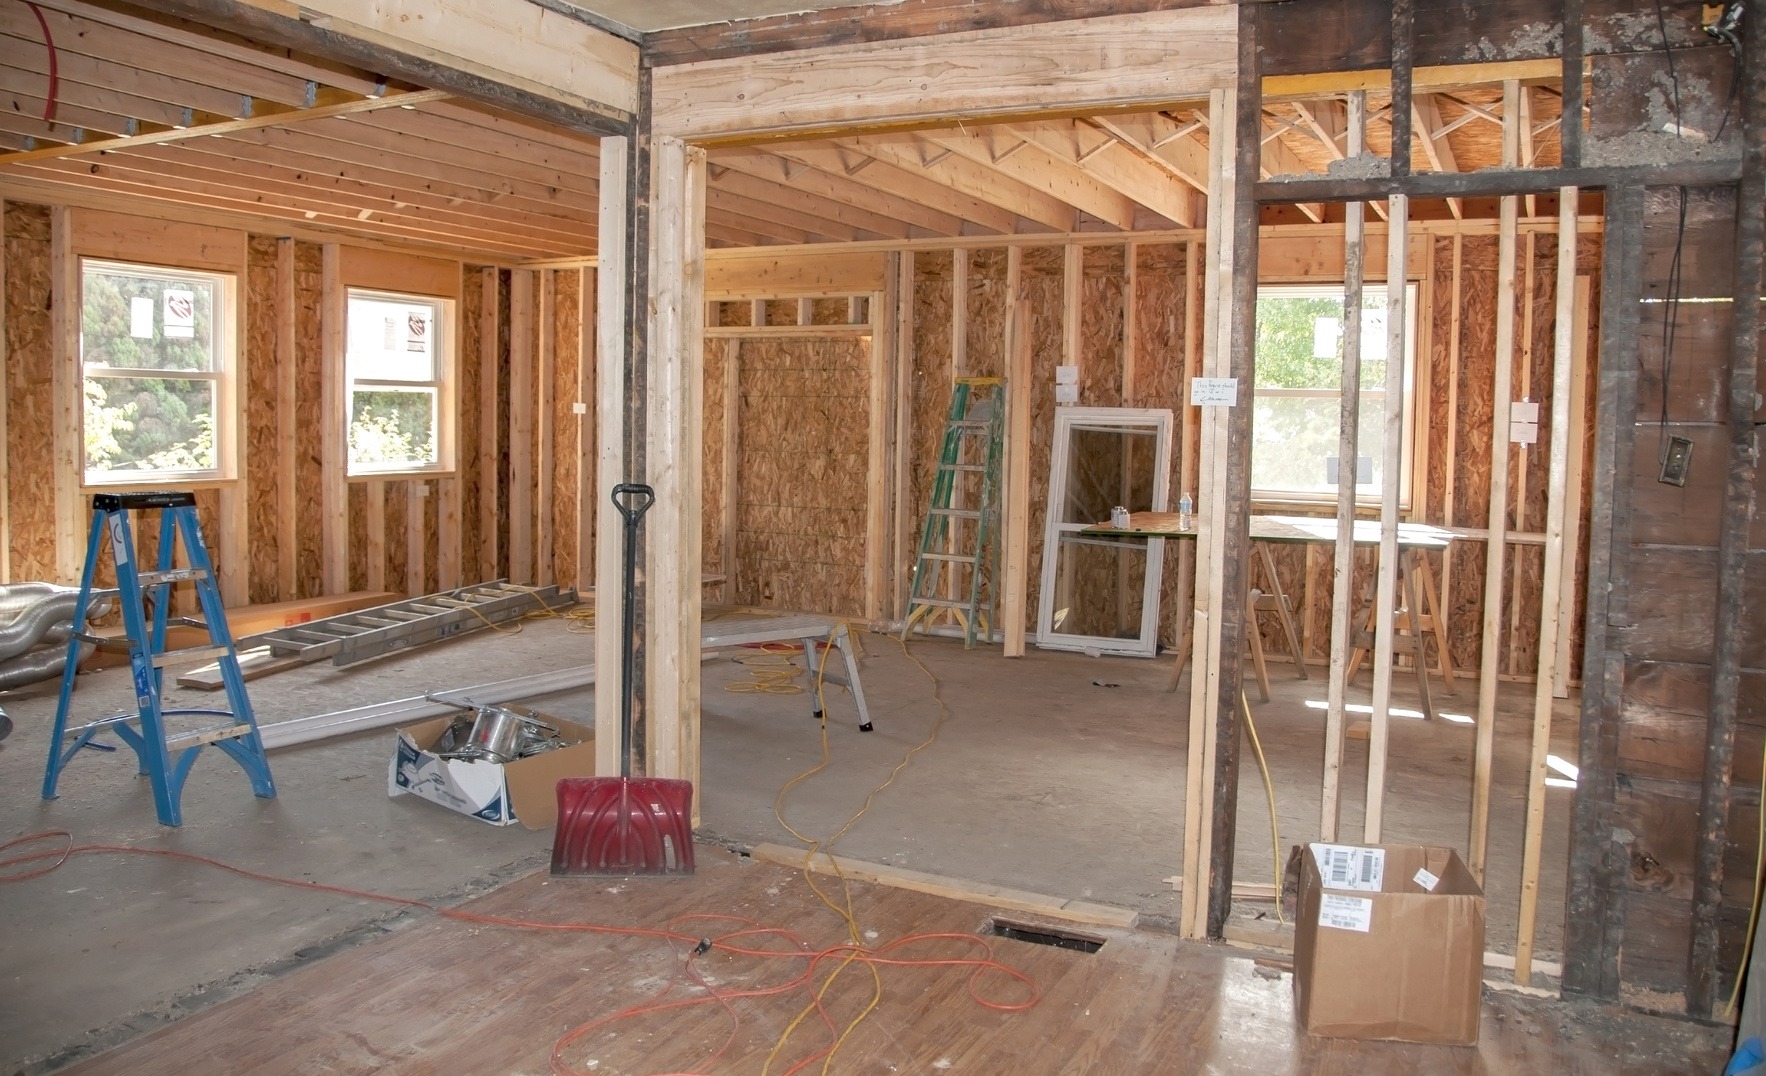 Home Renovations? Update Your Policy & Check Contractor Licensing!